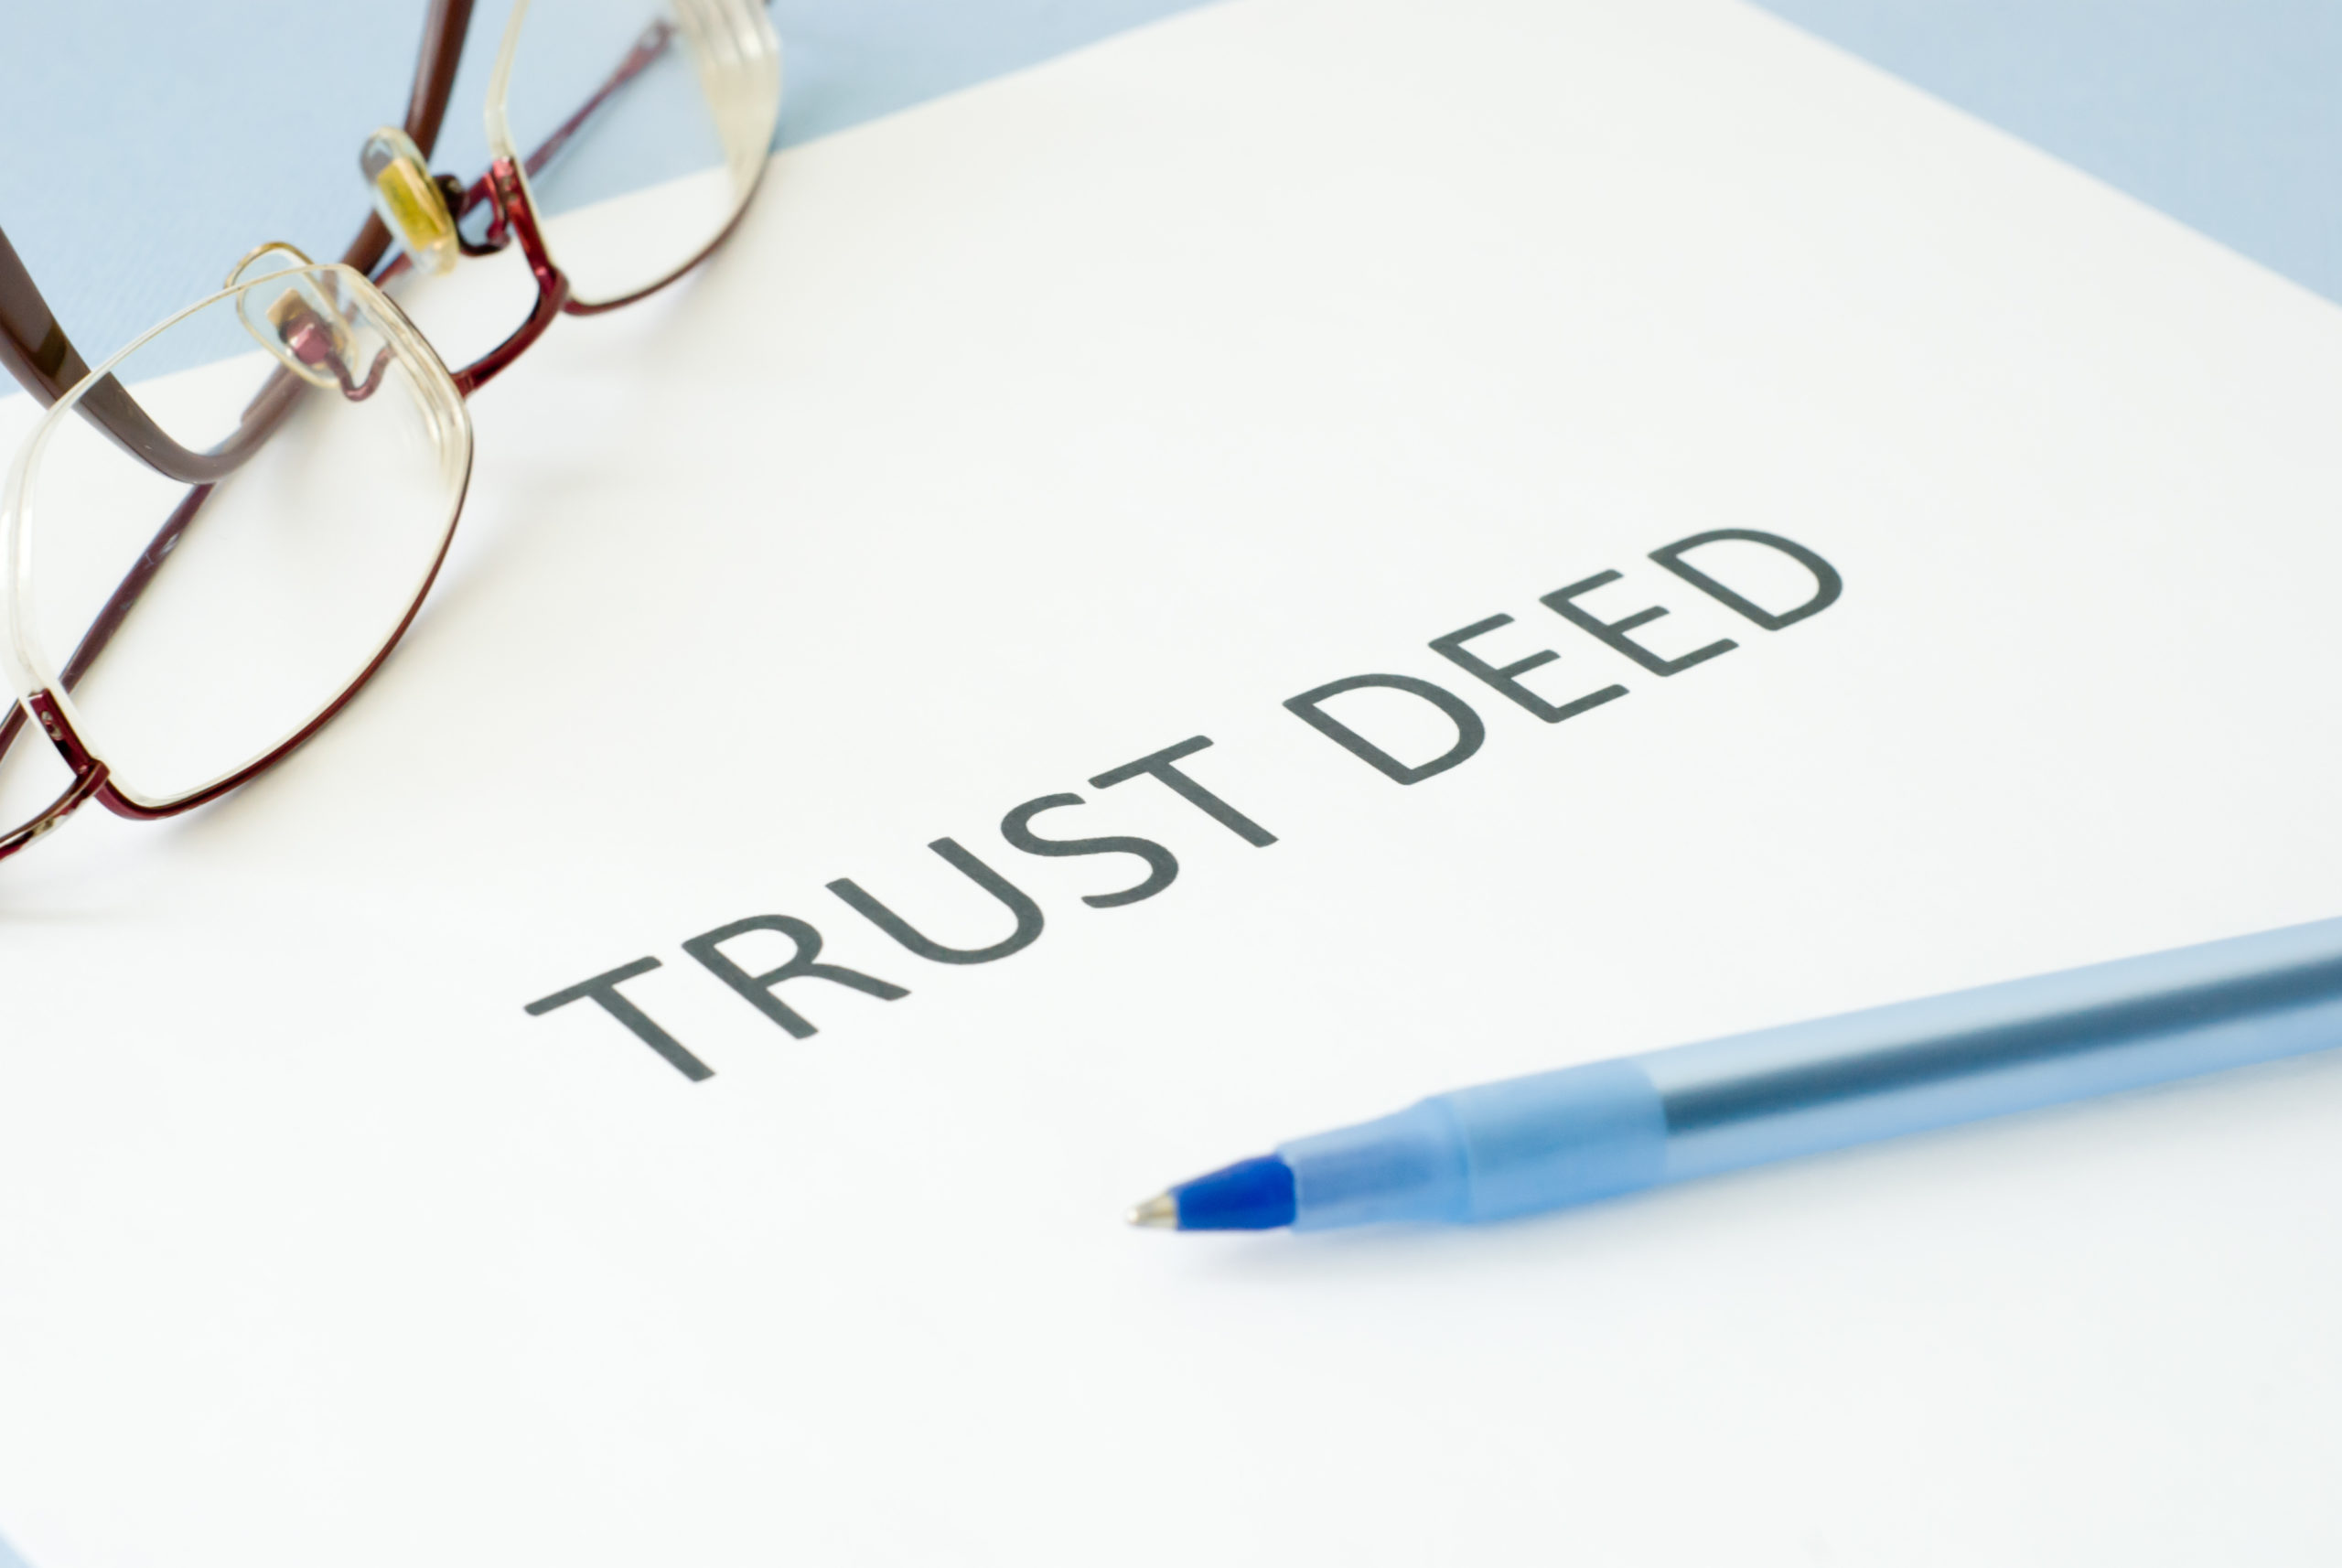 trust deed investing risks of pregnancy